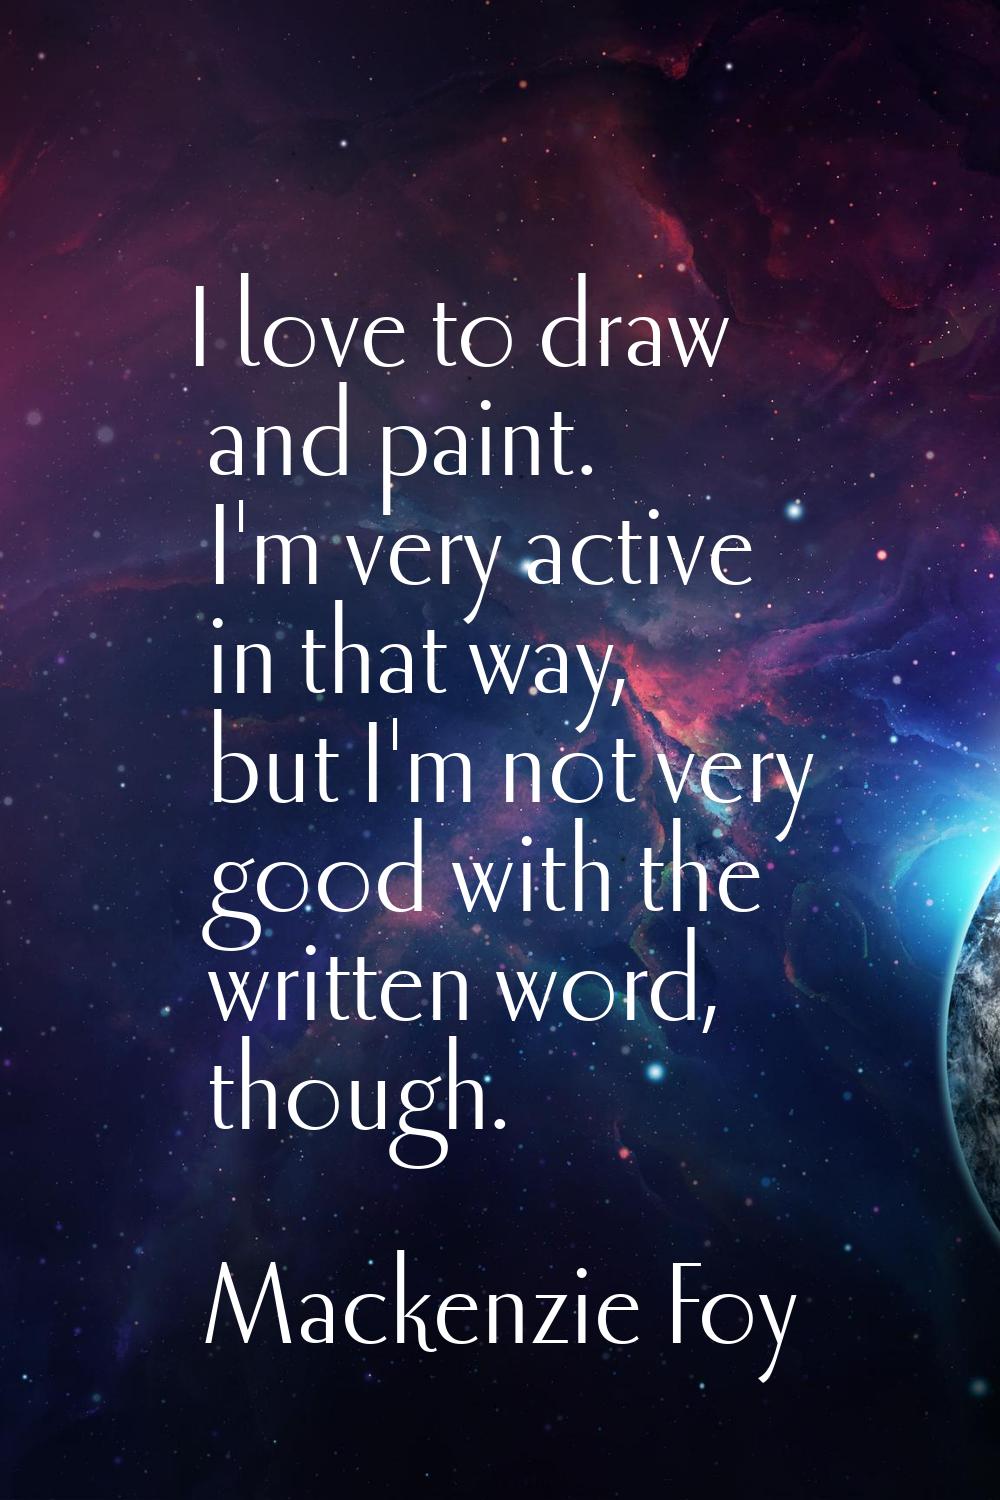 I love to draw and paint. I'm very active in that way, but I'm not very good with the written word,